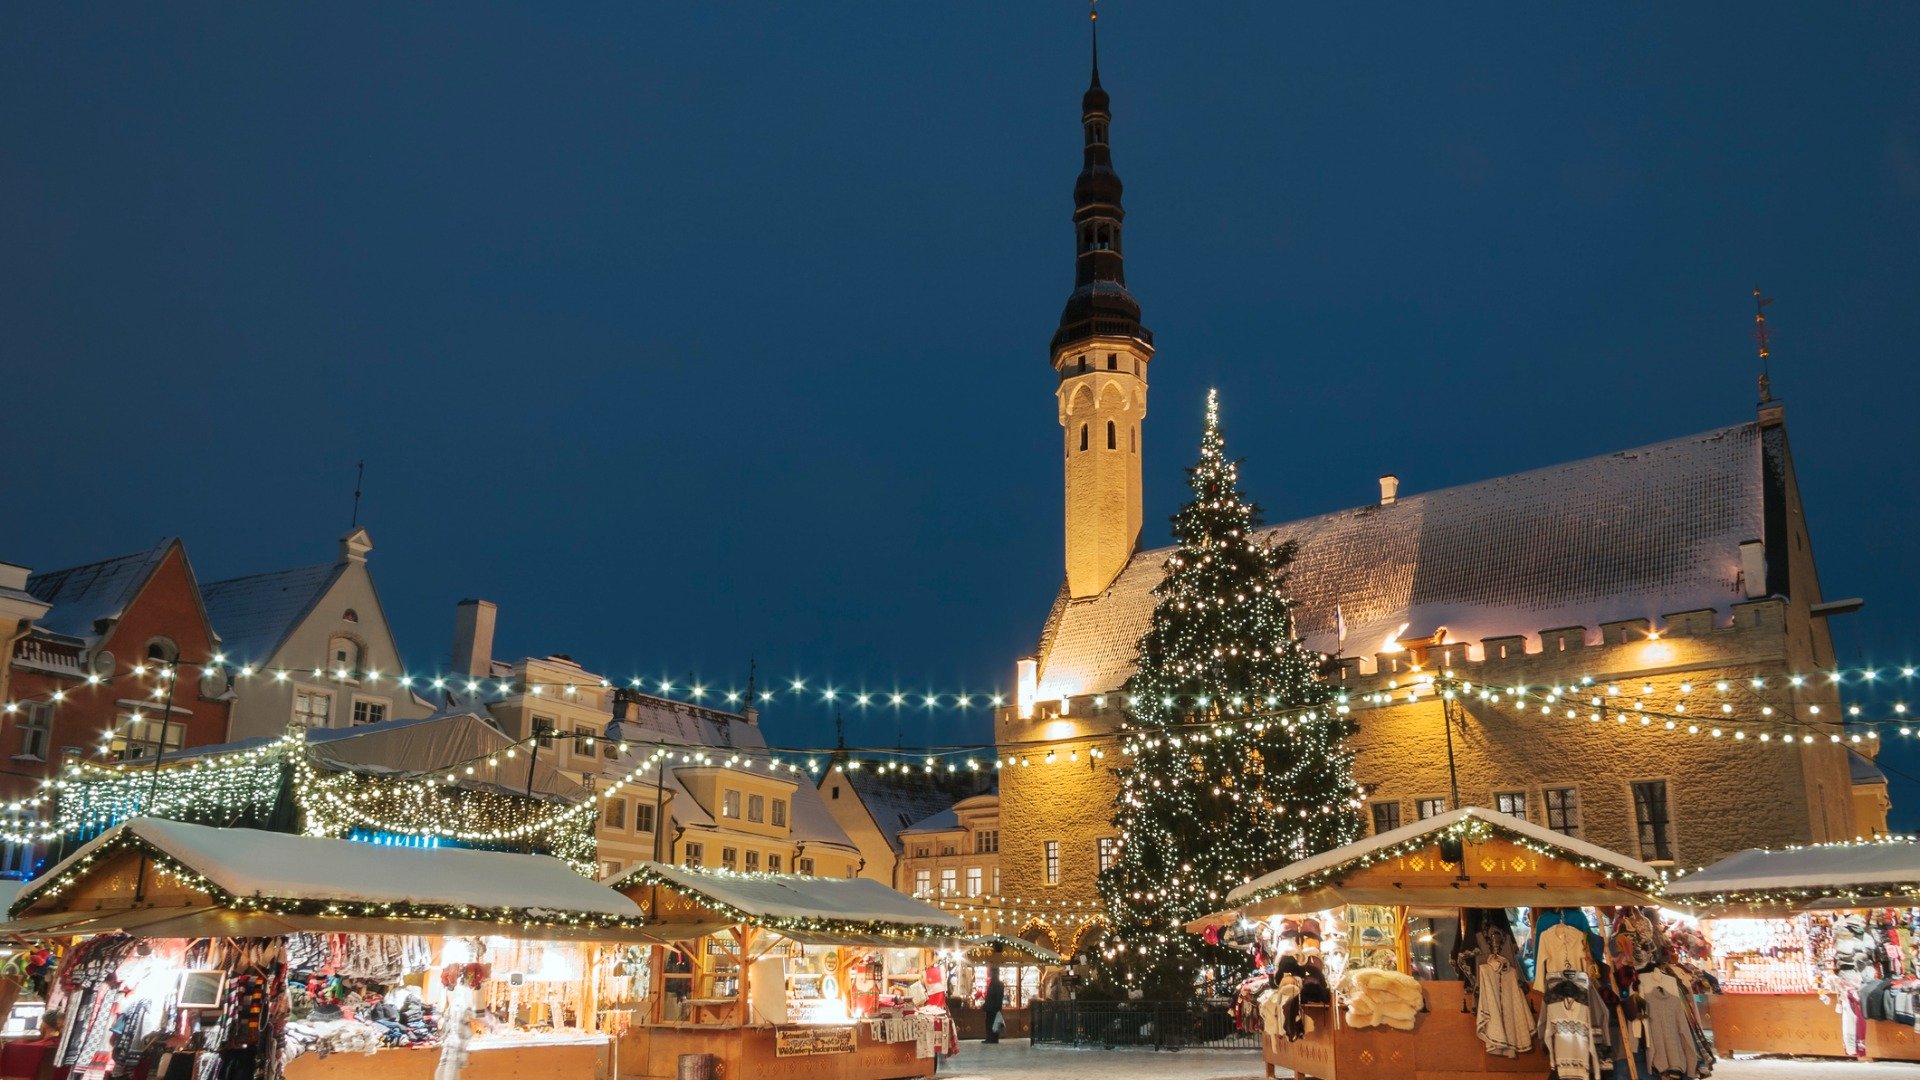 This image shows the Christmas market in Tallinn. There are Christmas lights and people stop by stalls selling souvenirs. 